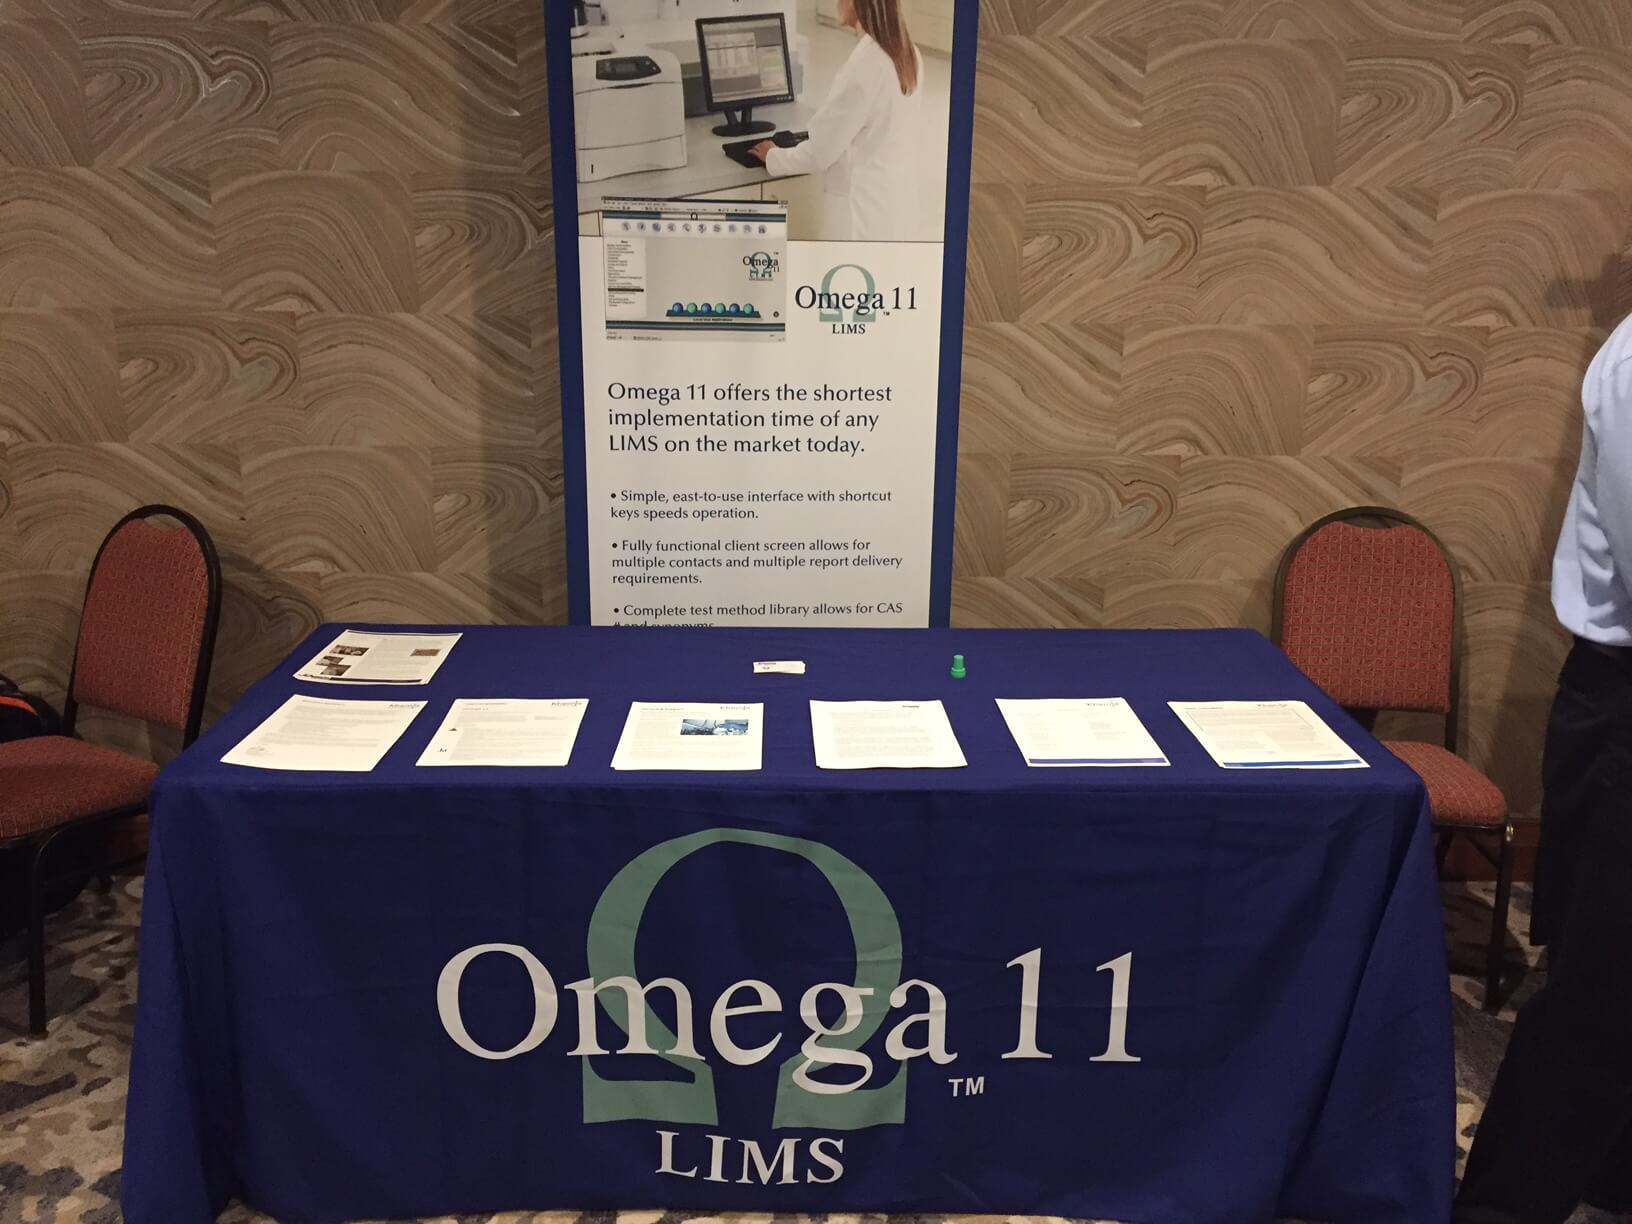 A table with papers and an omega 1 1 logo on it.